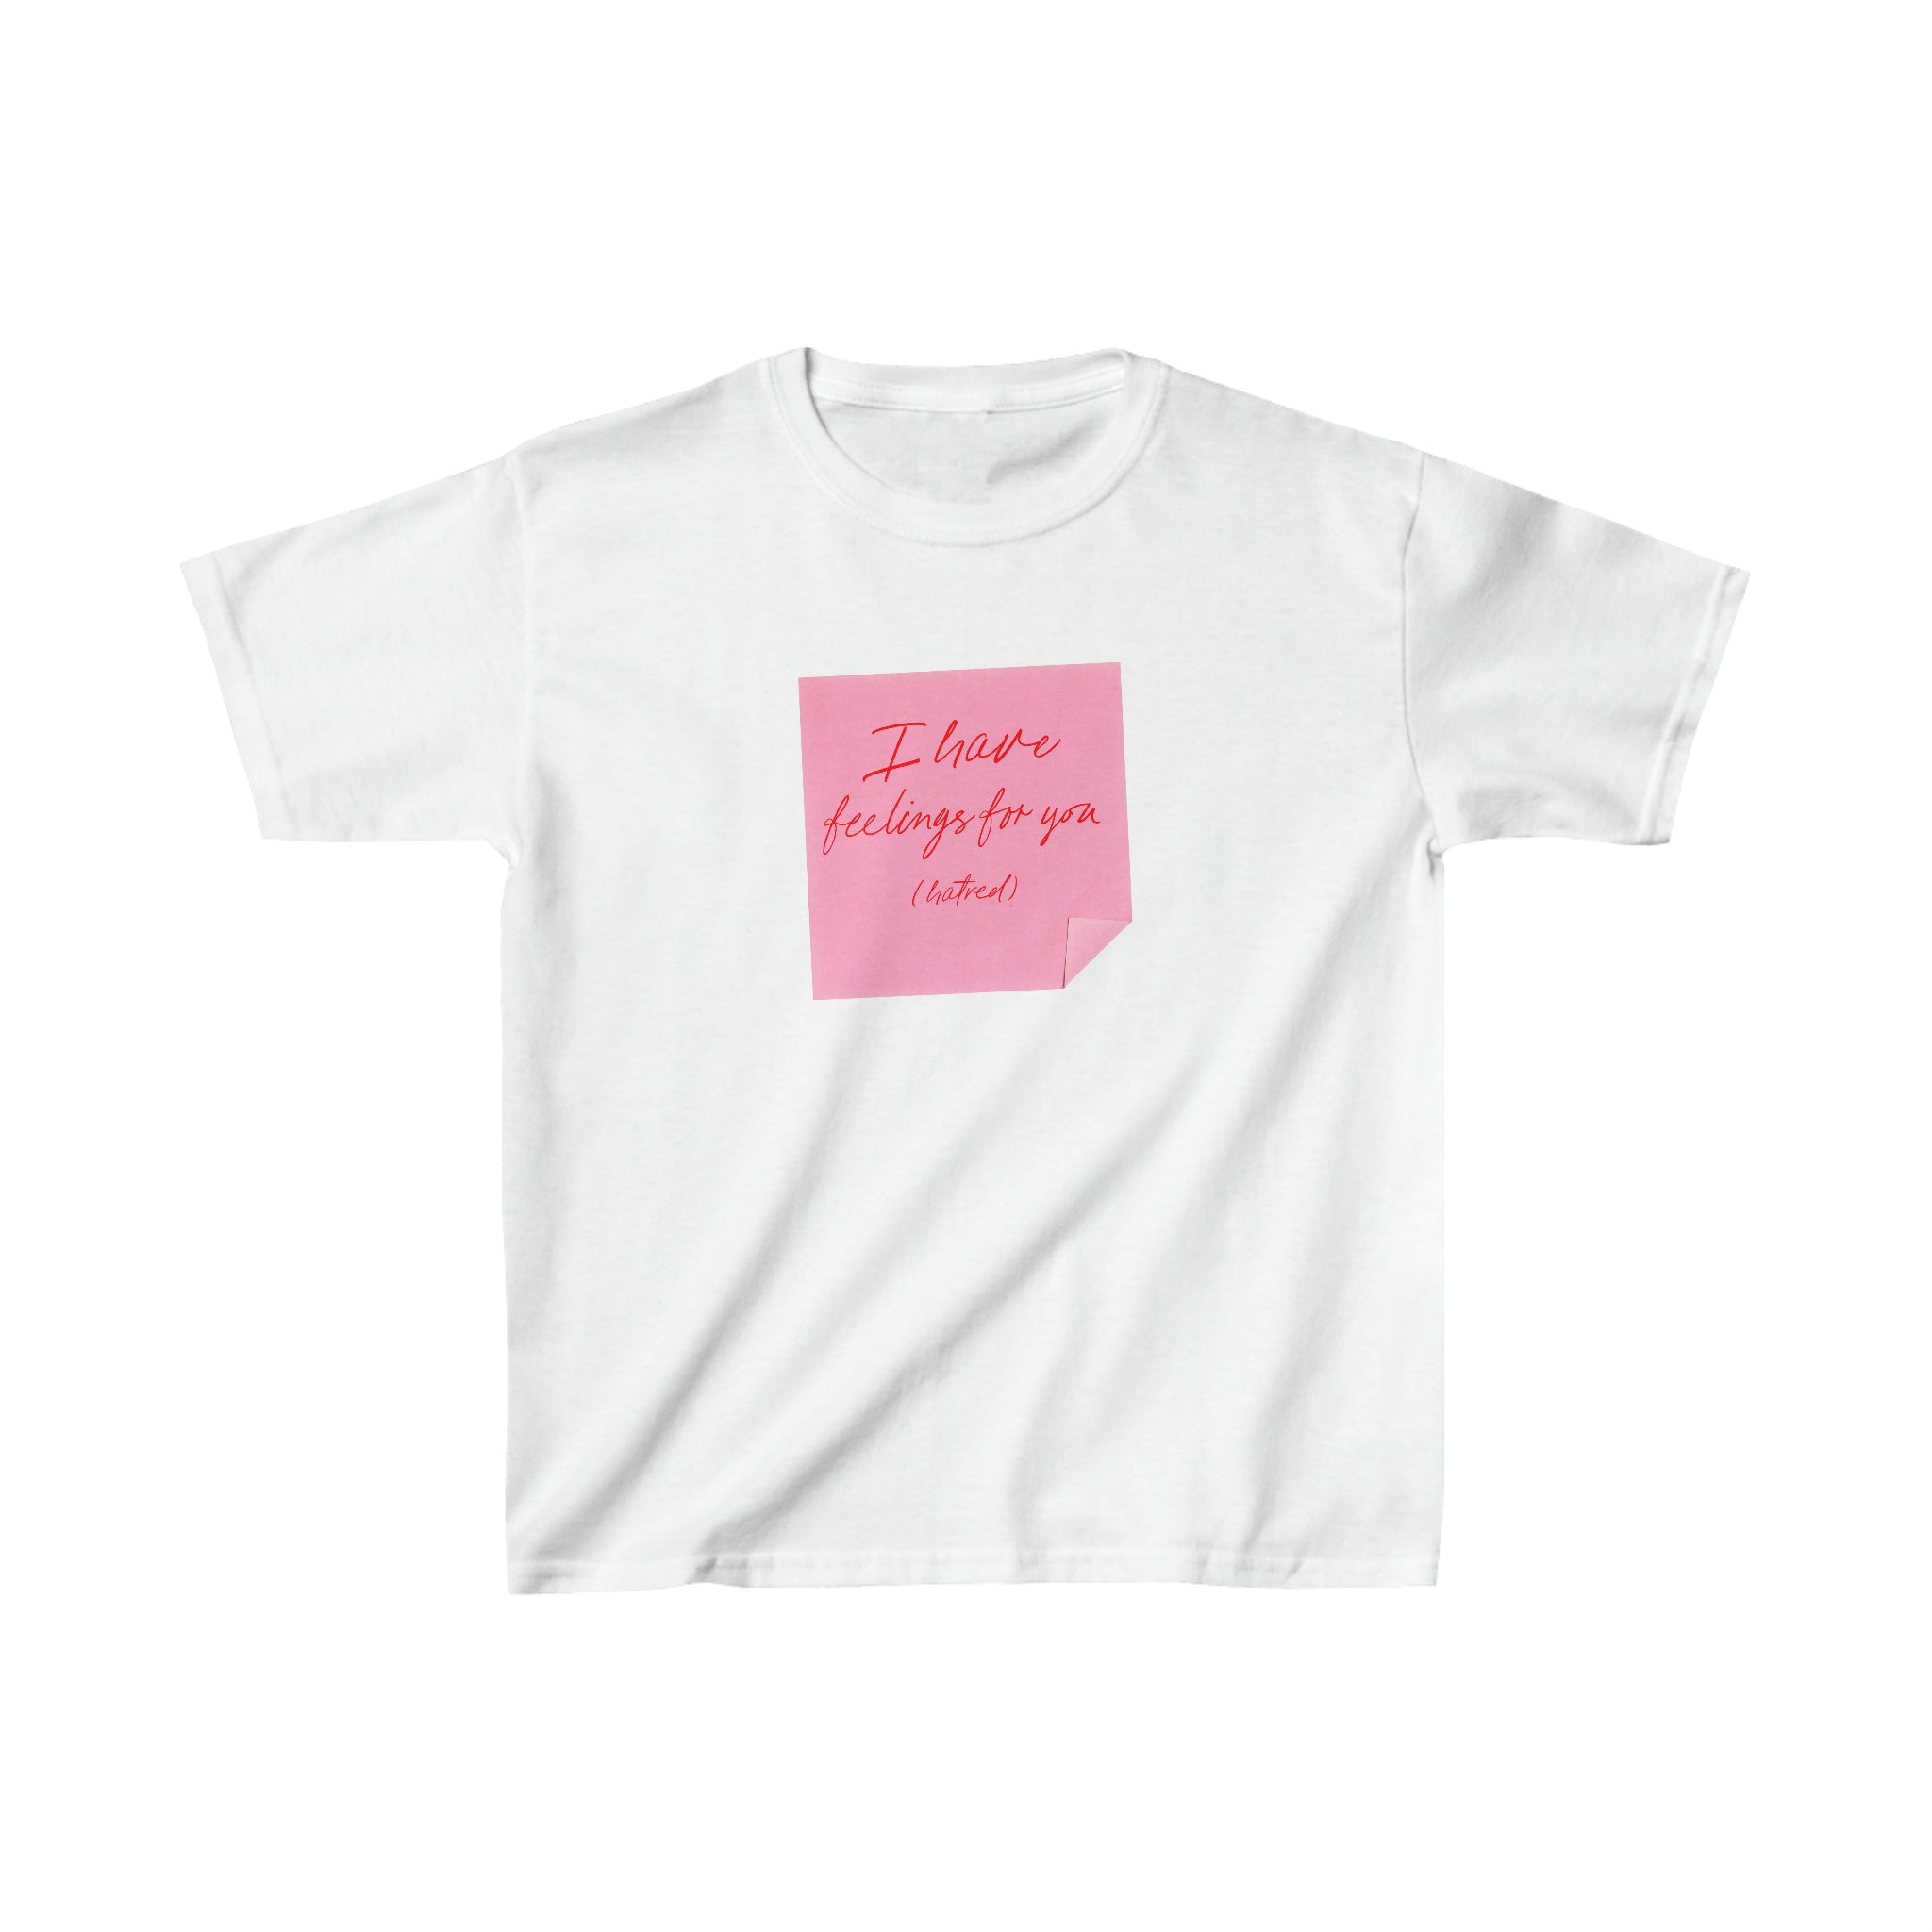 'I have feelings for you (hatred)' baby tee - In Print We Trust